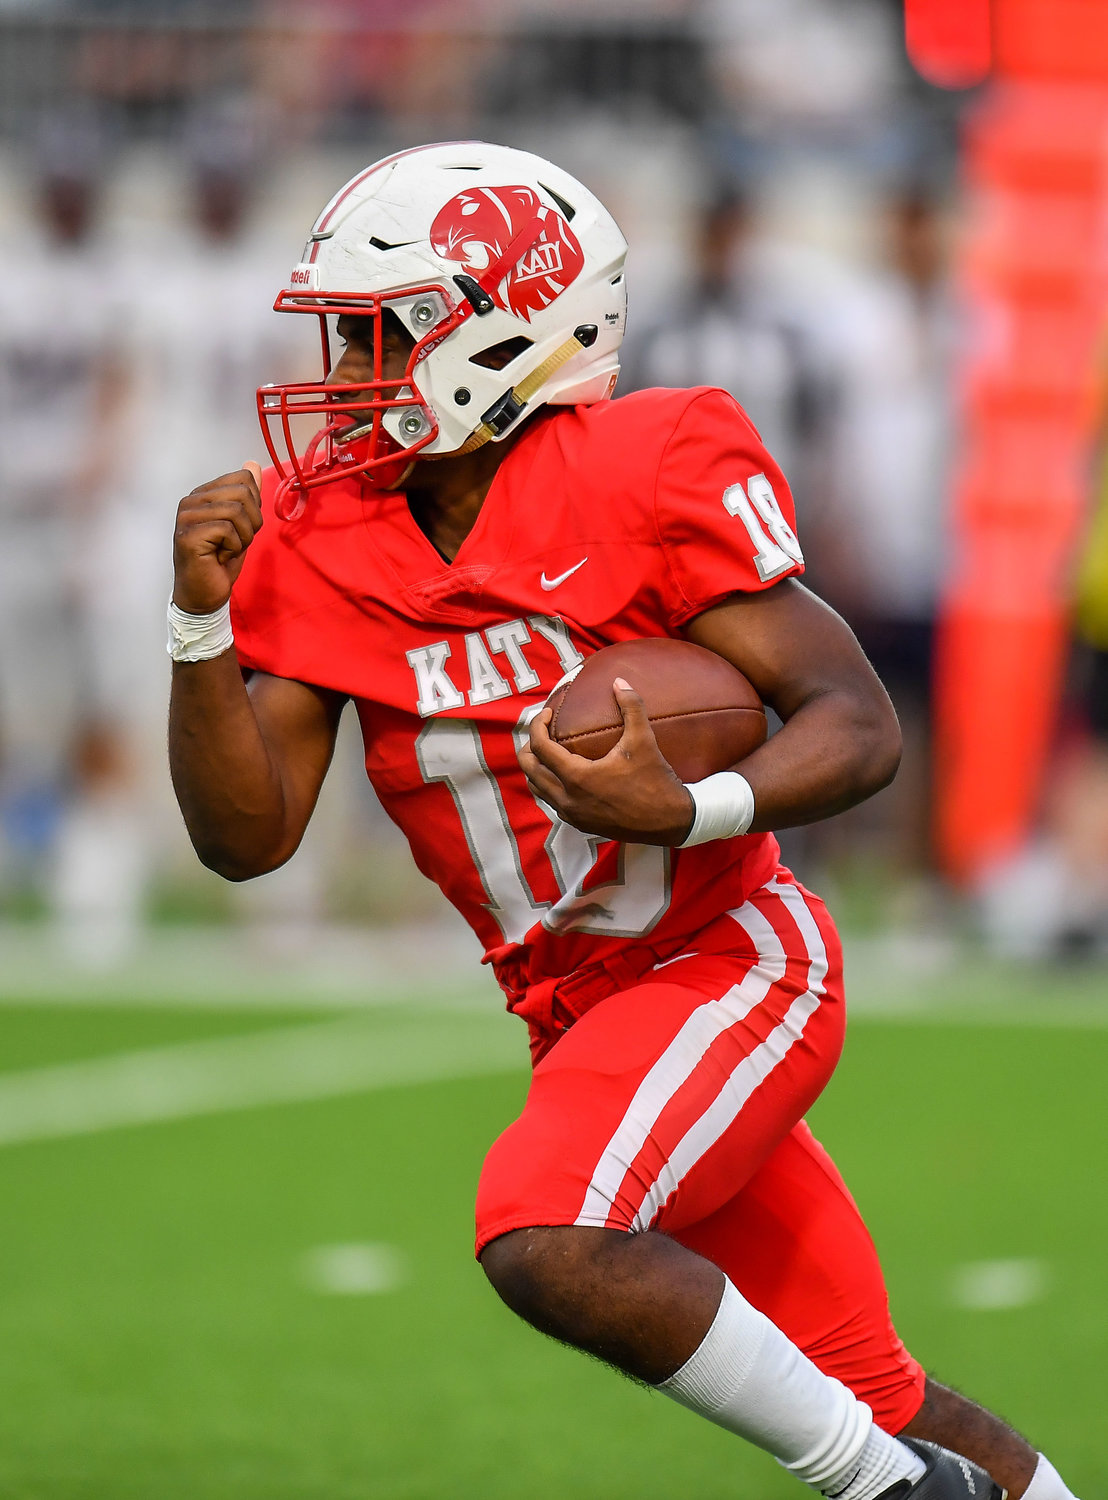 Katy, Tx. Oct 1, 2021: Katy's #18 Dallas Glass carries the ball picking up a first down during a game between Katy Tigers and Tompkins Falcons at Legacy Stadium in Katy. (Photo by Mark Goodman / Katy Times)